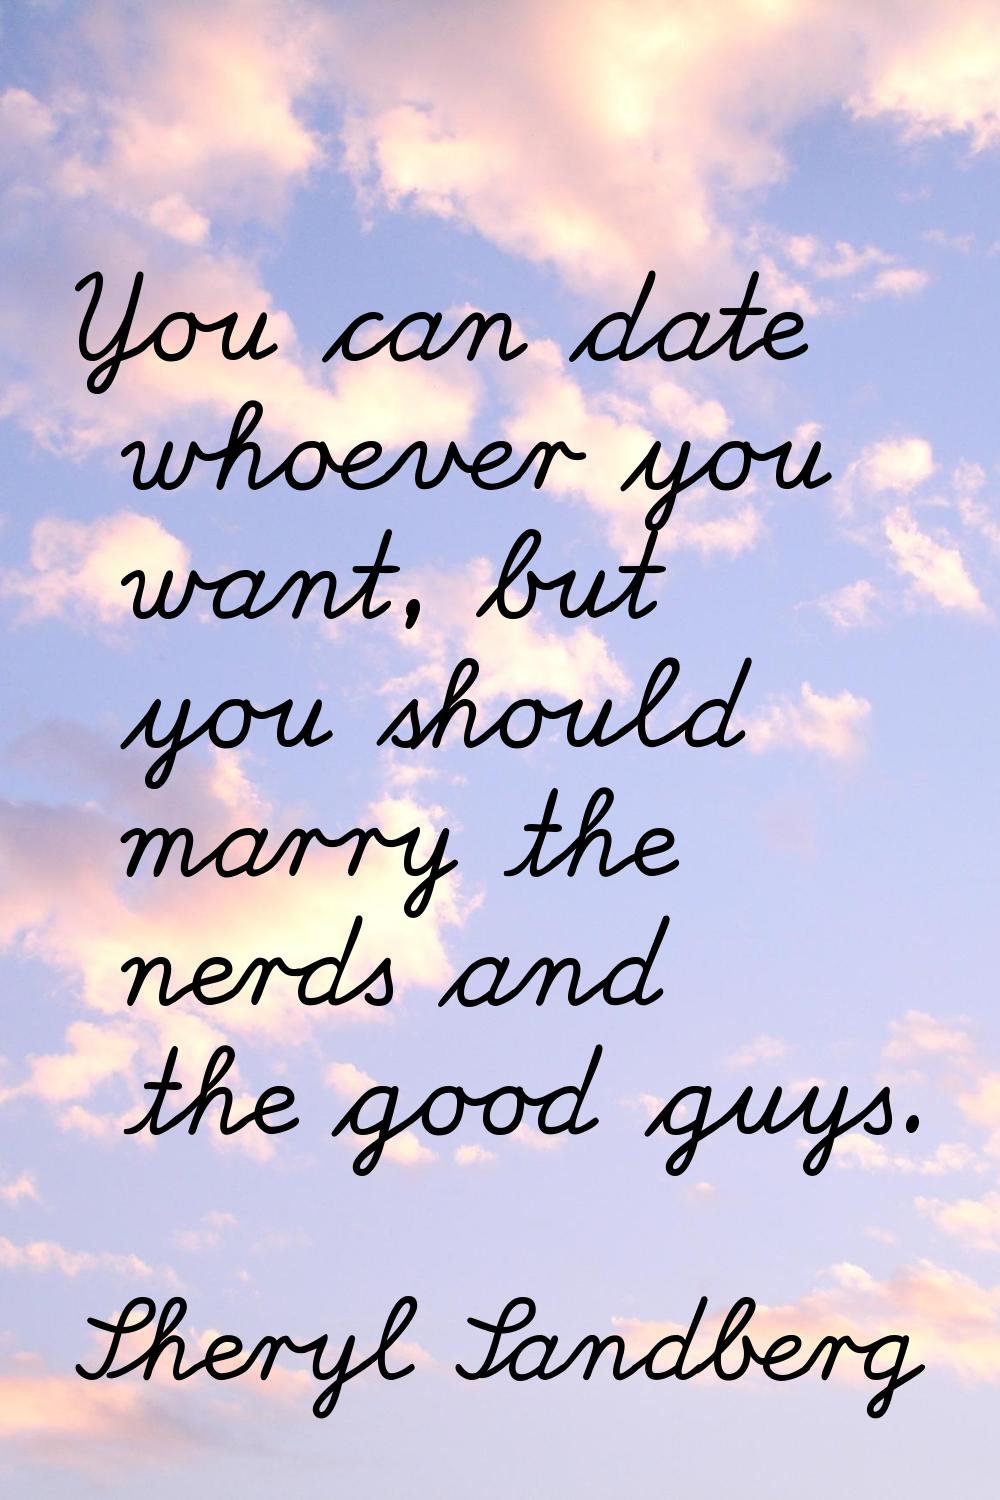 You can date whoever you want, but you should marry the nerds and the good guys.